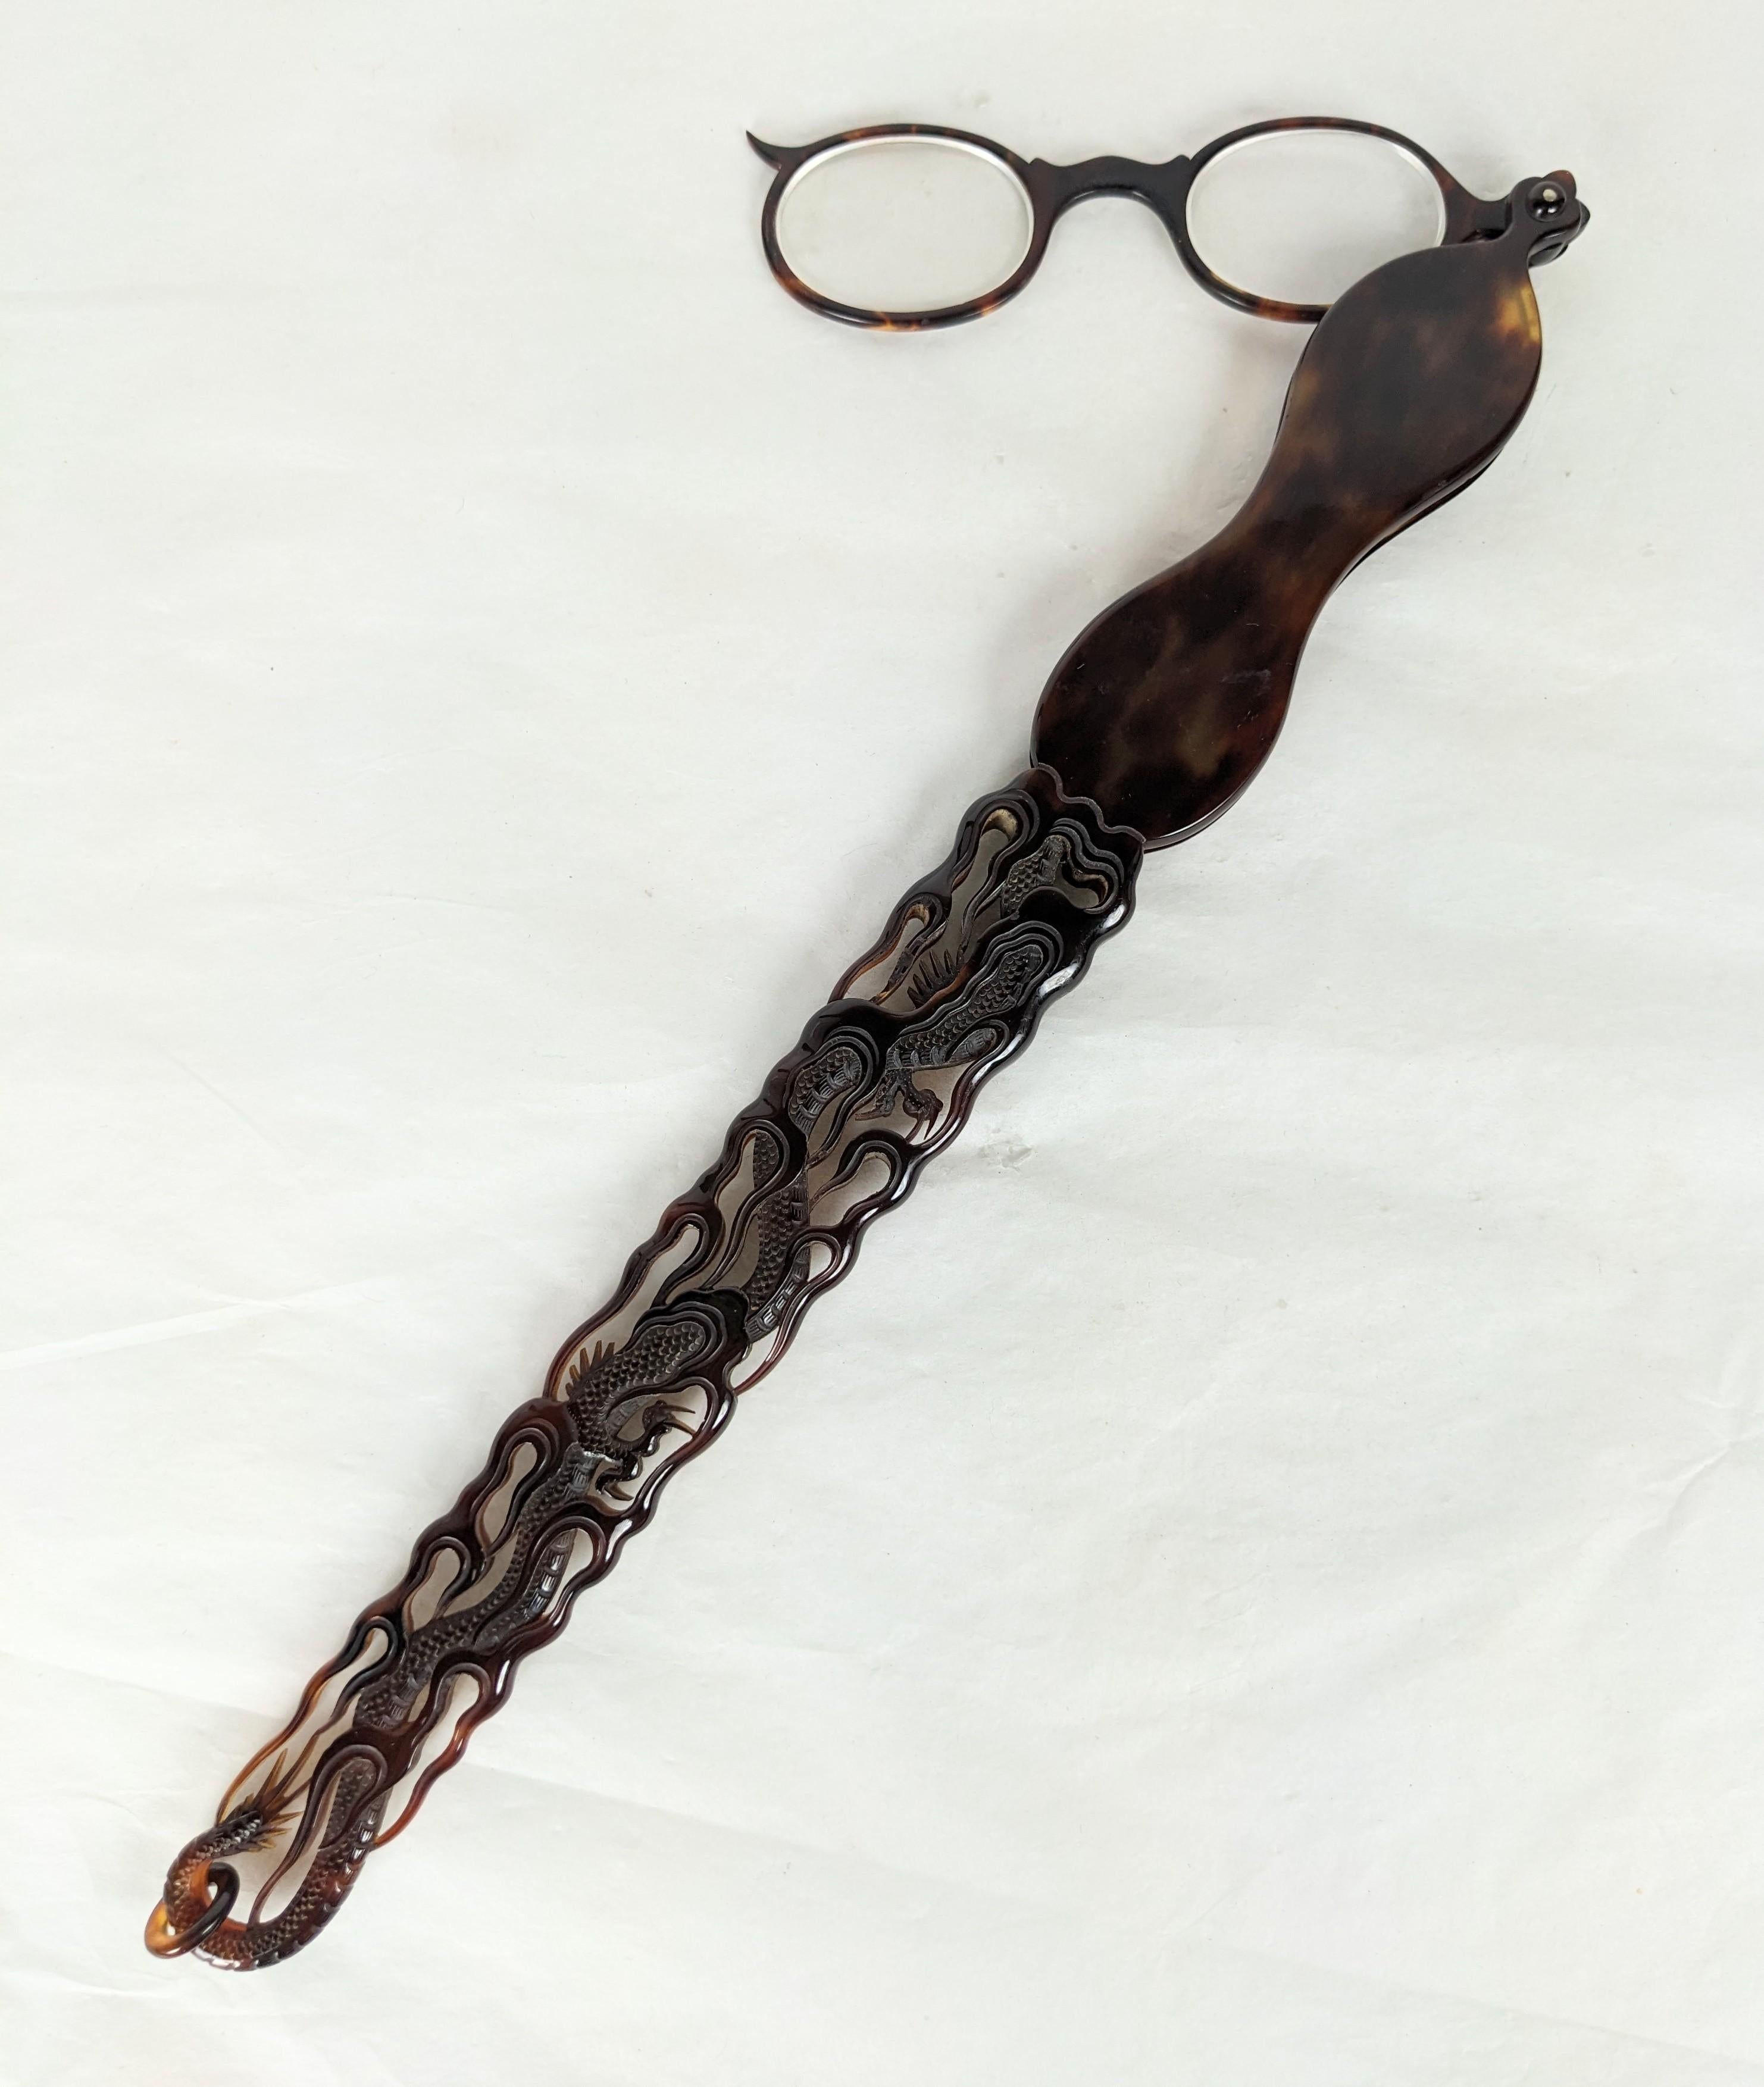 Amazing Chinese Tortoiseshell Lorgnette for the European Market from the mid 19th Century. Marked 